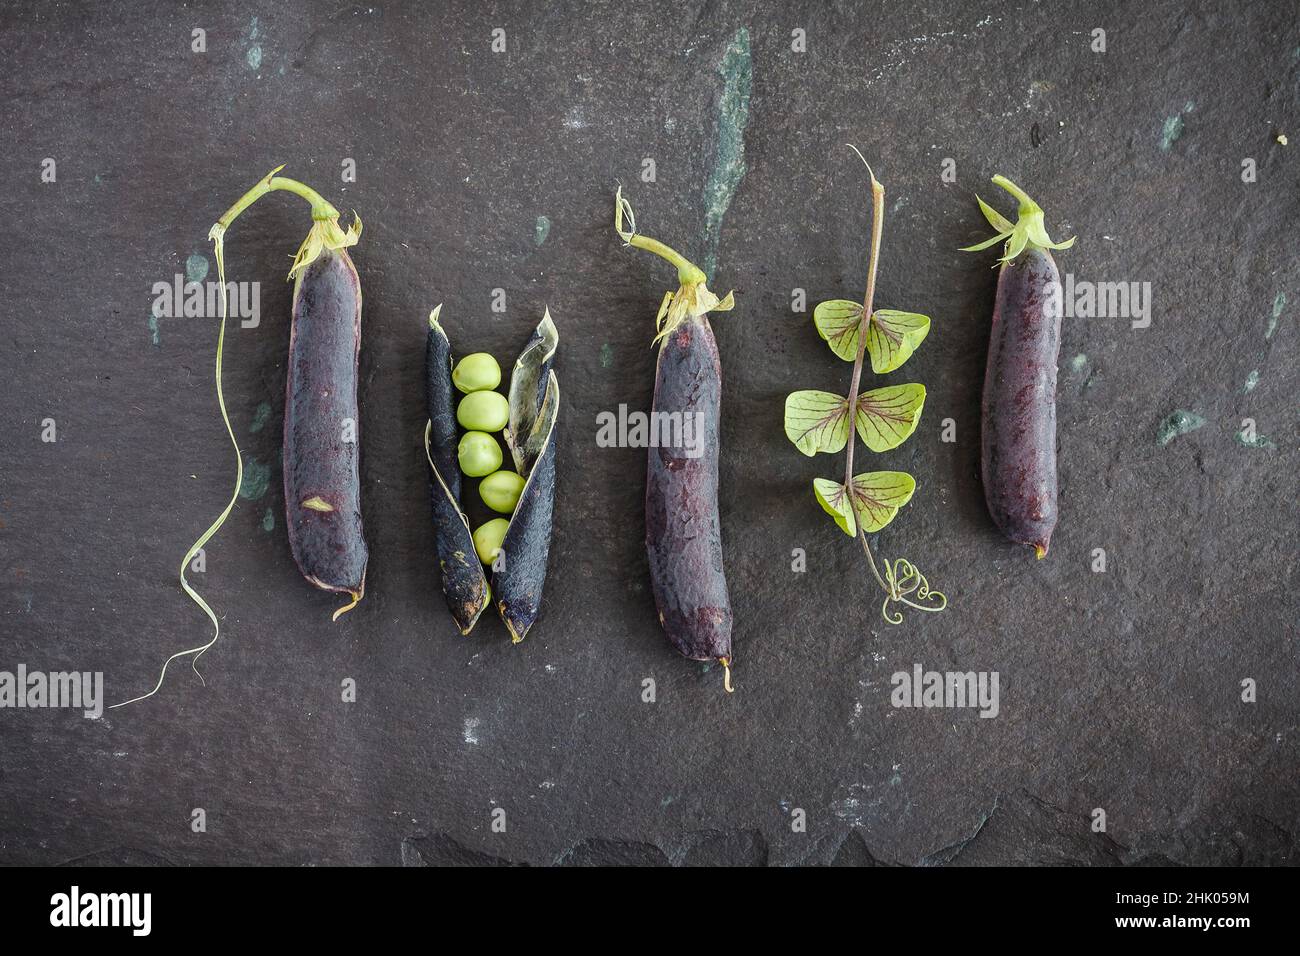 Fresh peas with purple pods on riven slate work surface Stock Photo